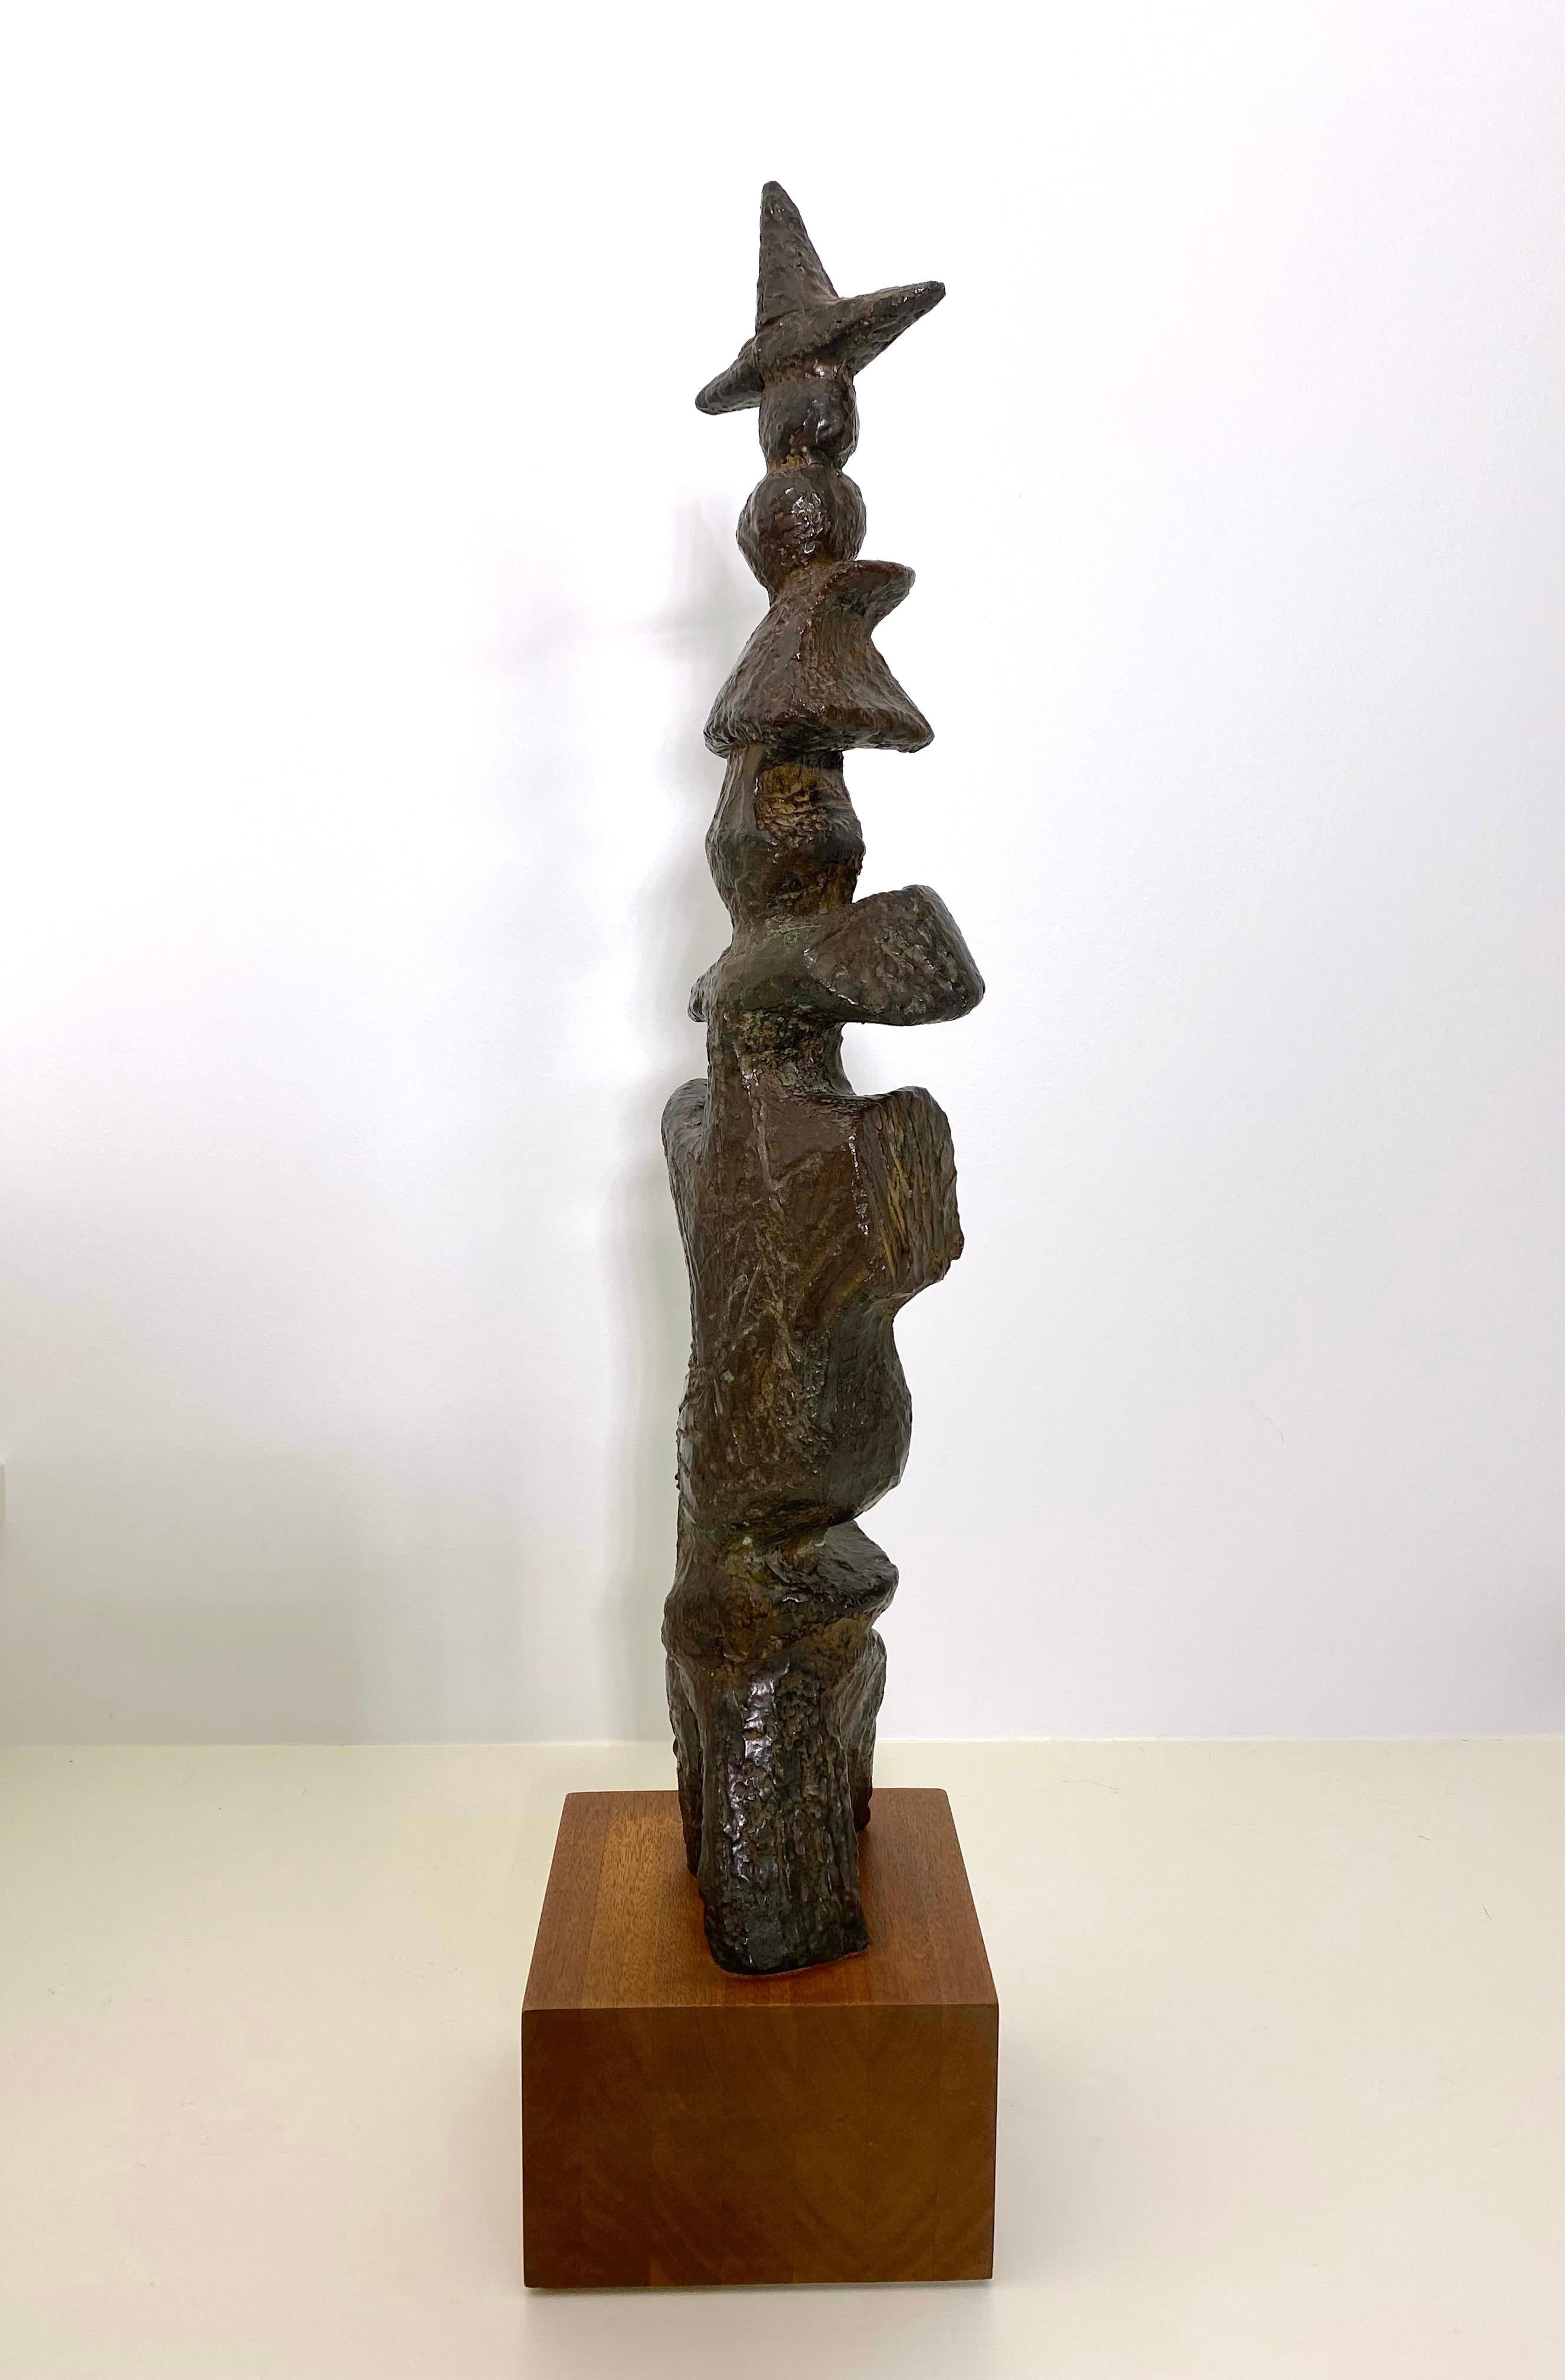 Marcel Marti Bronze Abstract Totem Sculpture For Sale 7